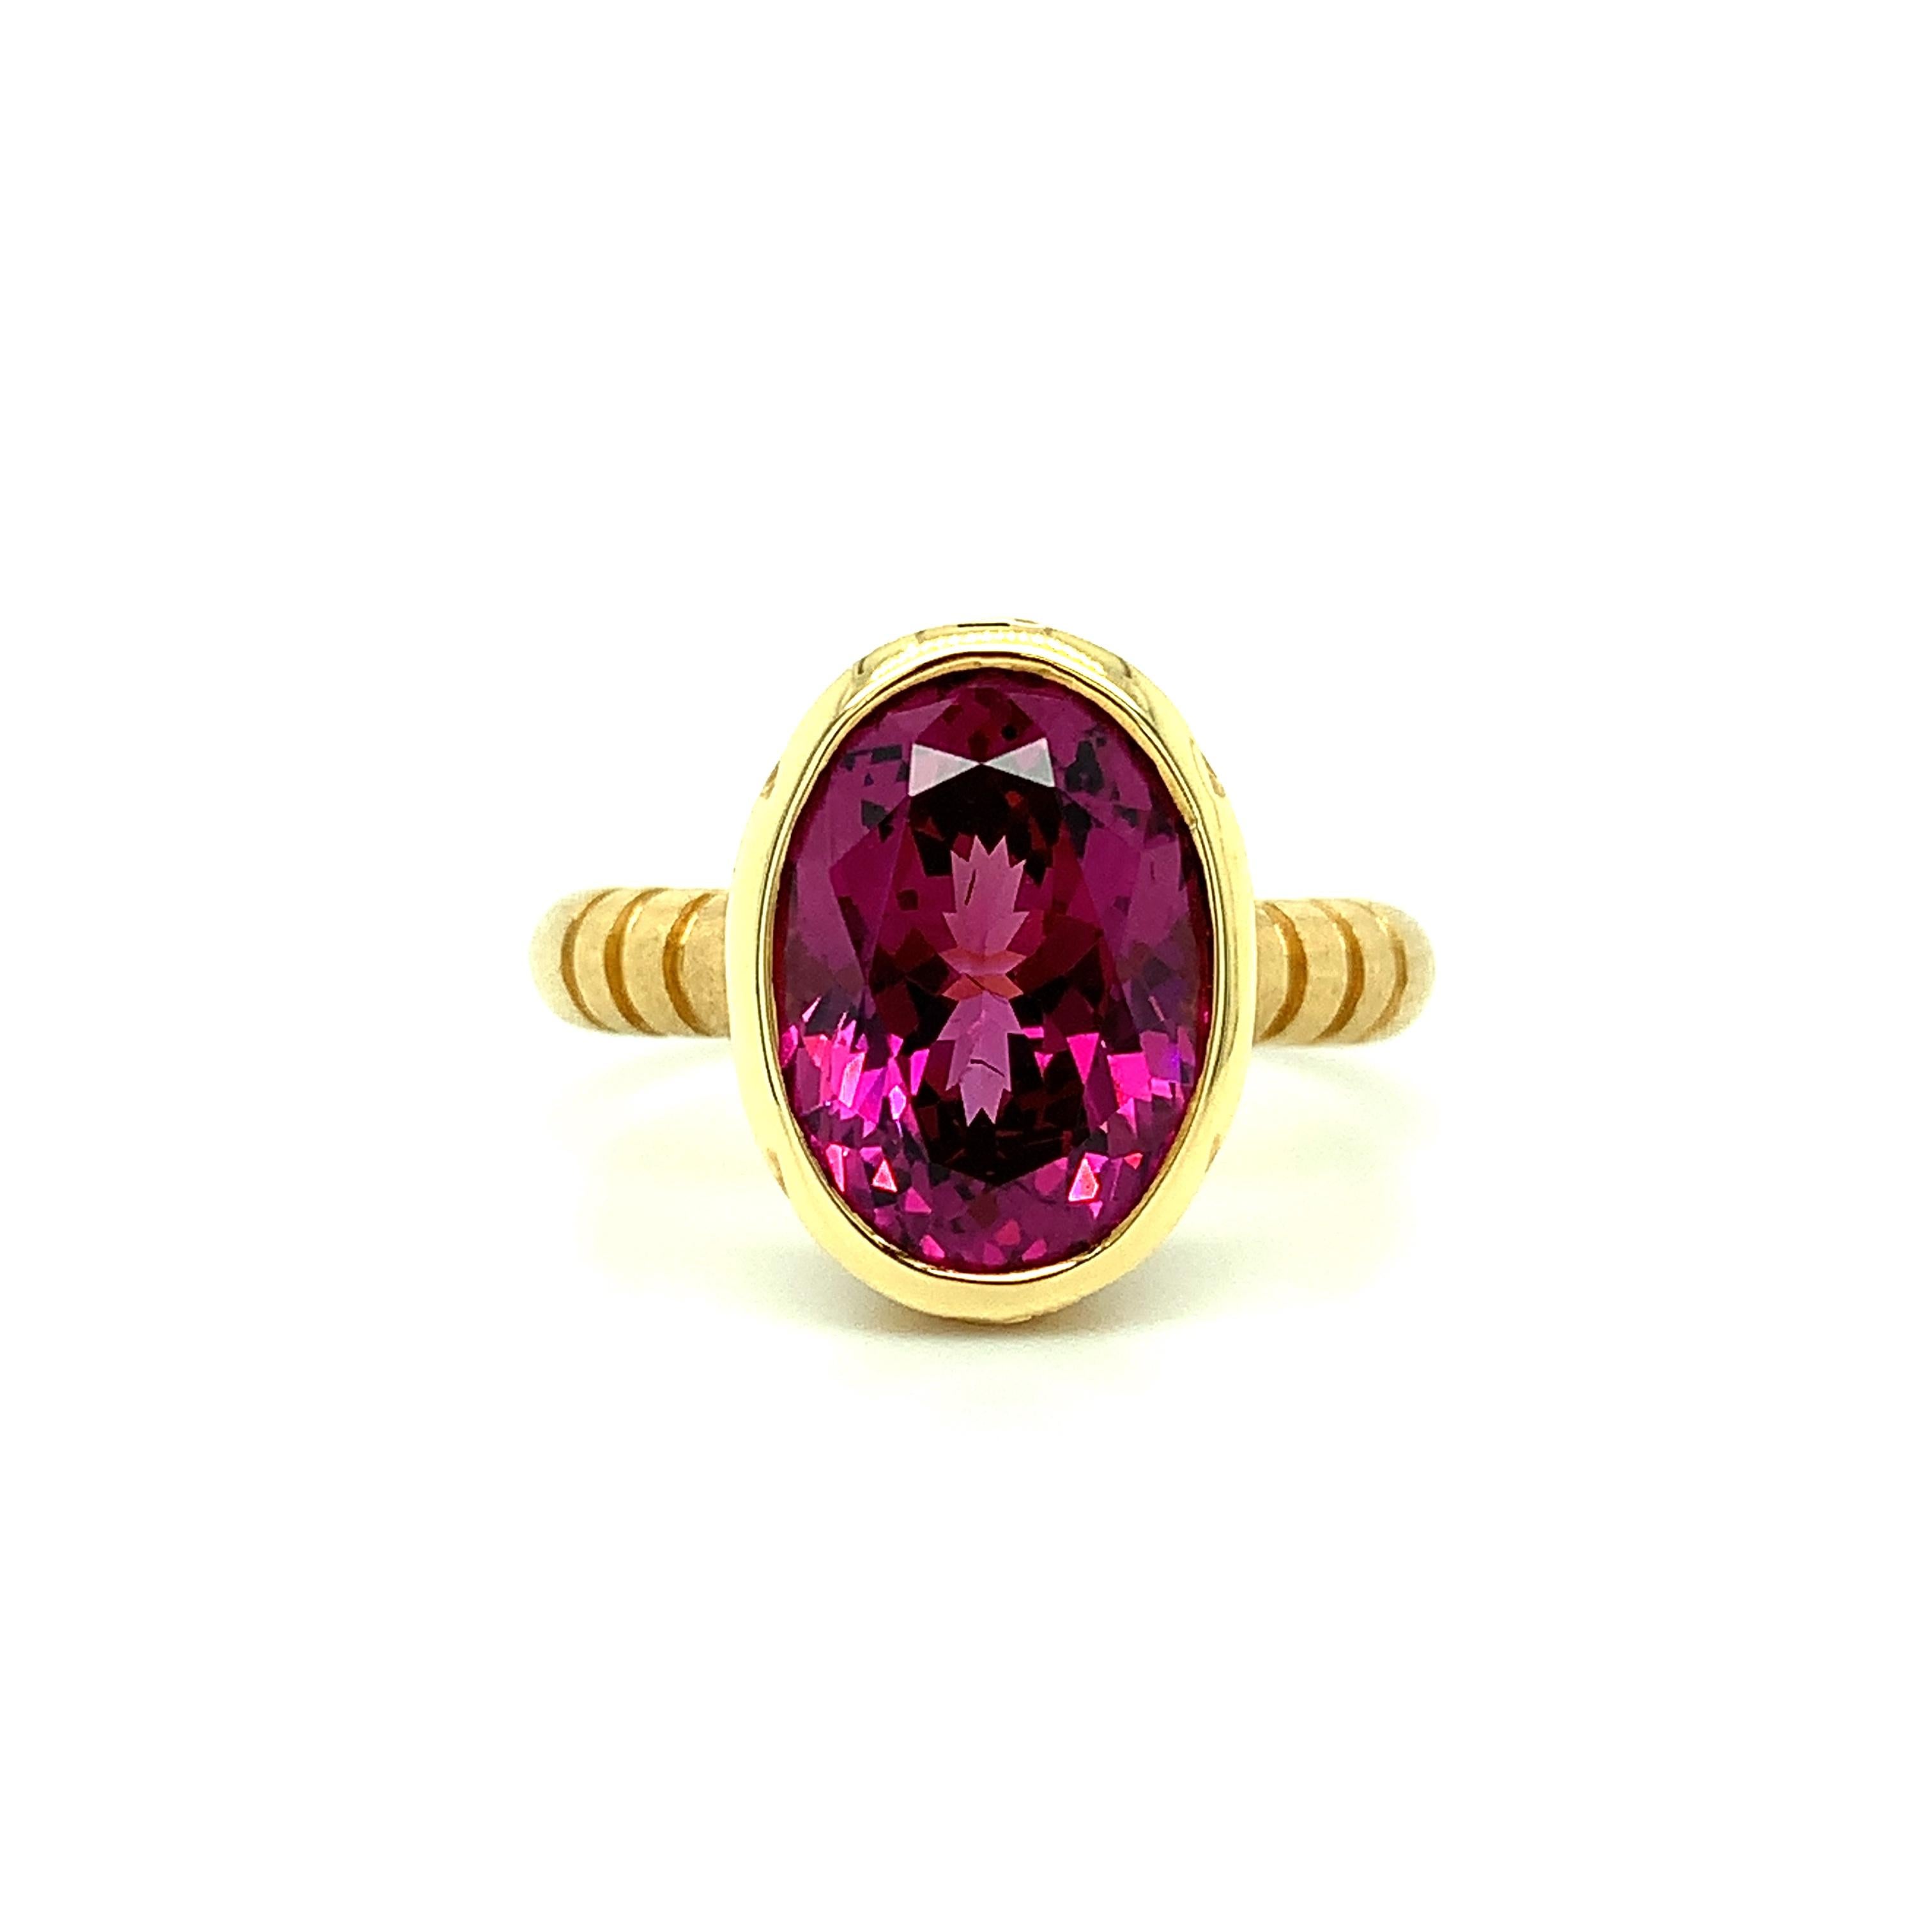 This lovely Byzantine-inspired ring features a luscious 5.88 carat pinkish-purple rhodolite garnet with exceptional color and brilliance. Bezel-set in a handmade, 18k yellow gold ring, this gorgeous rhodolite exhibits brilliant pink and purple hues